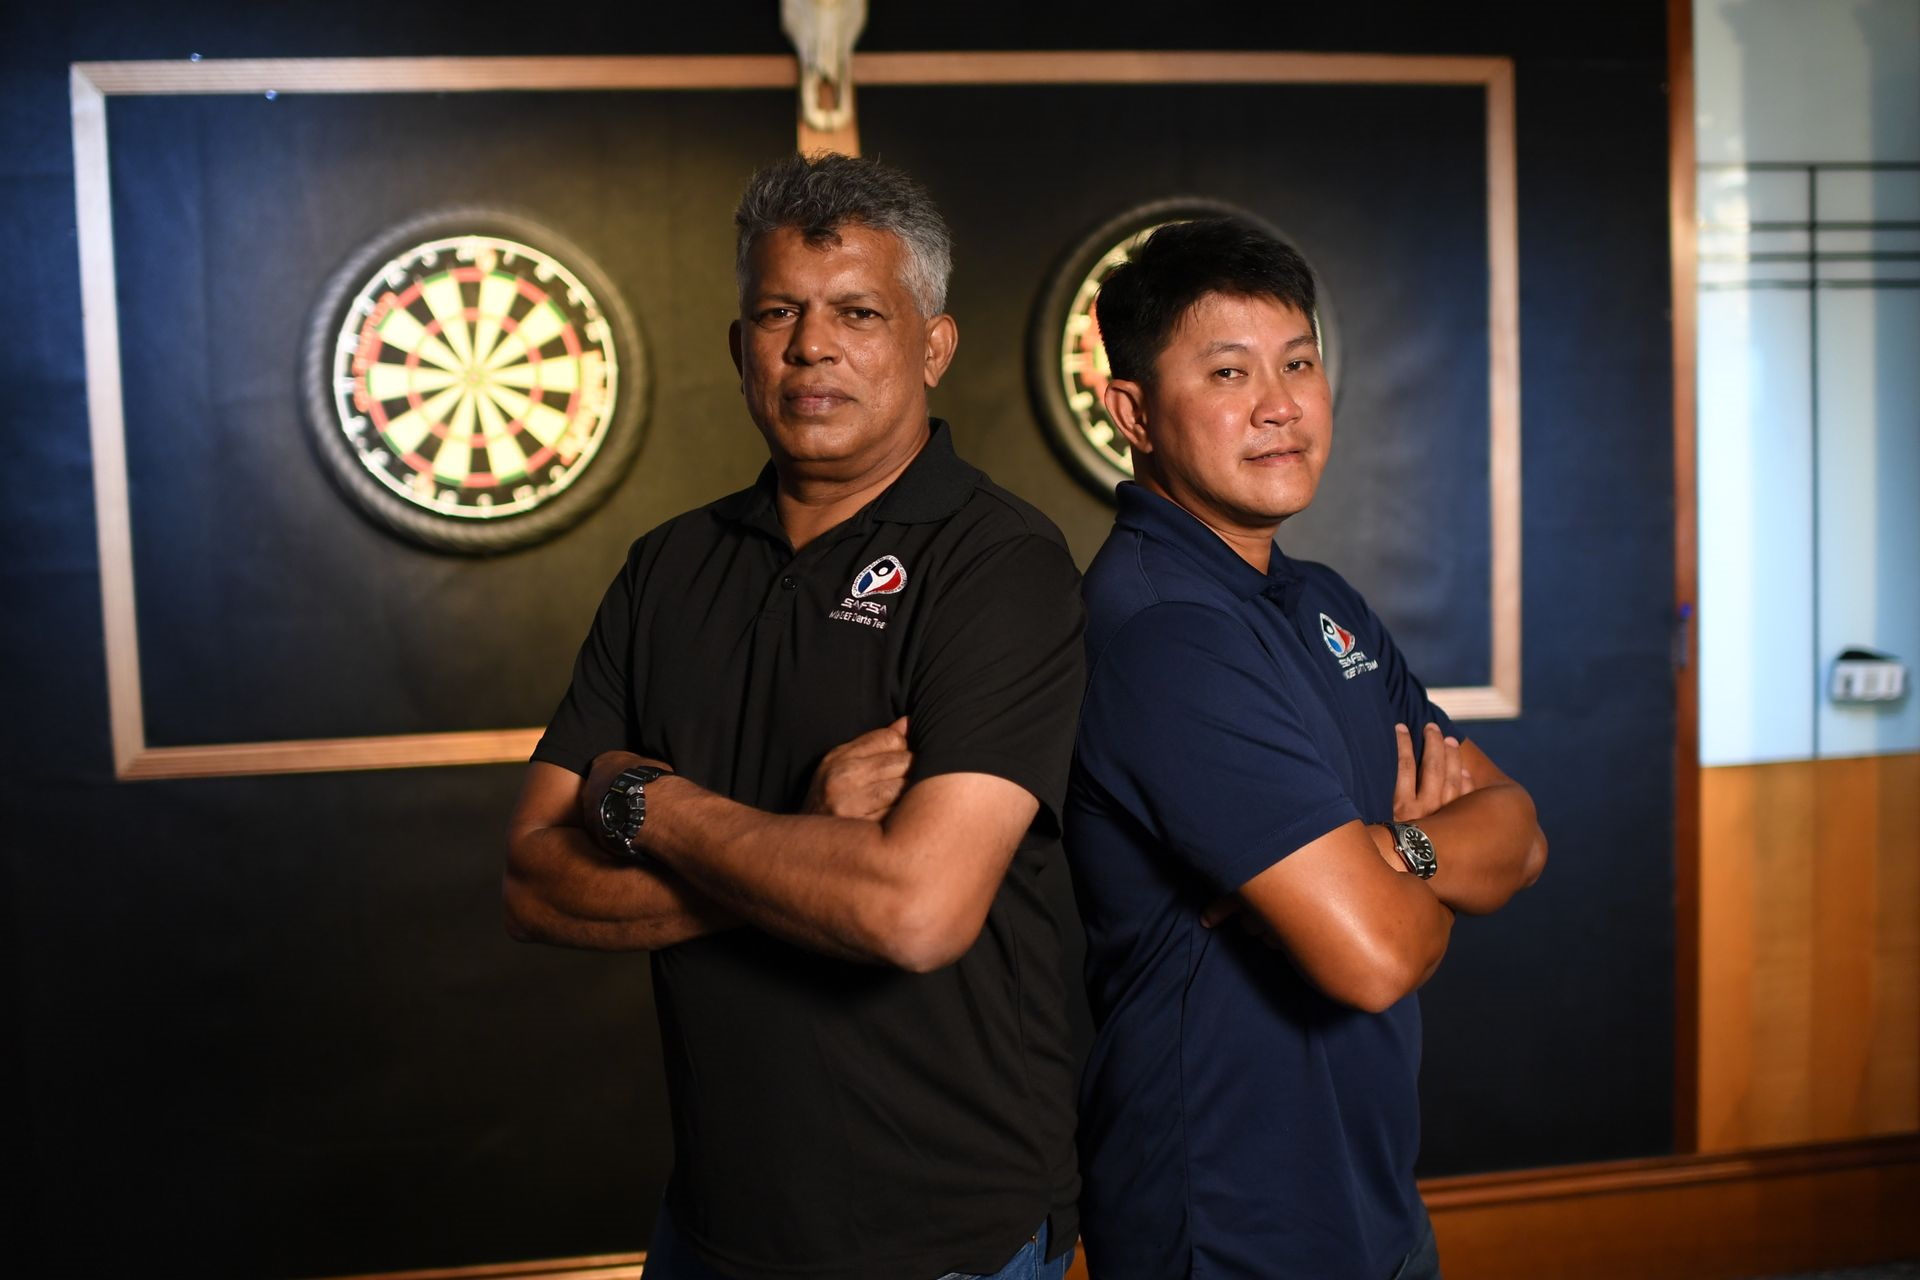 Aim for perfection with SAFSA darts players